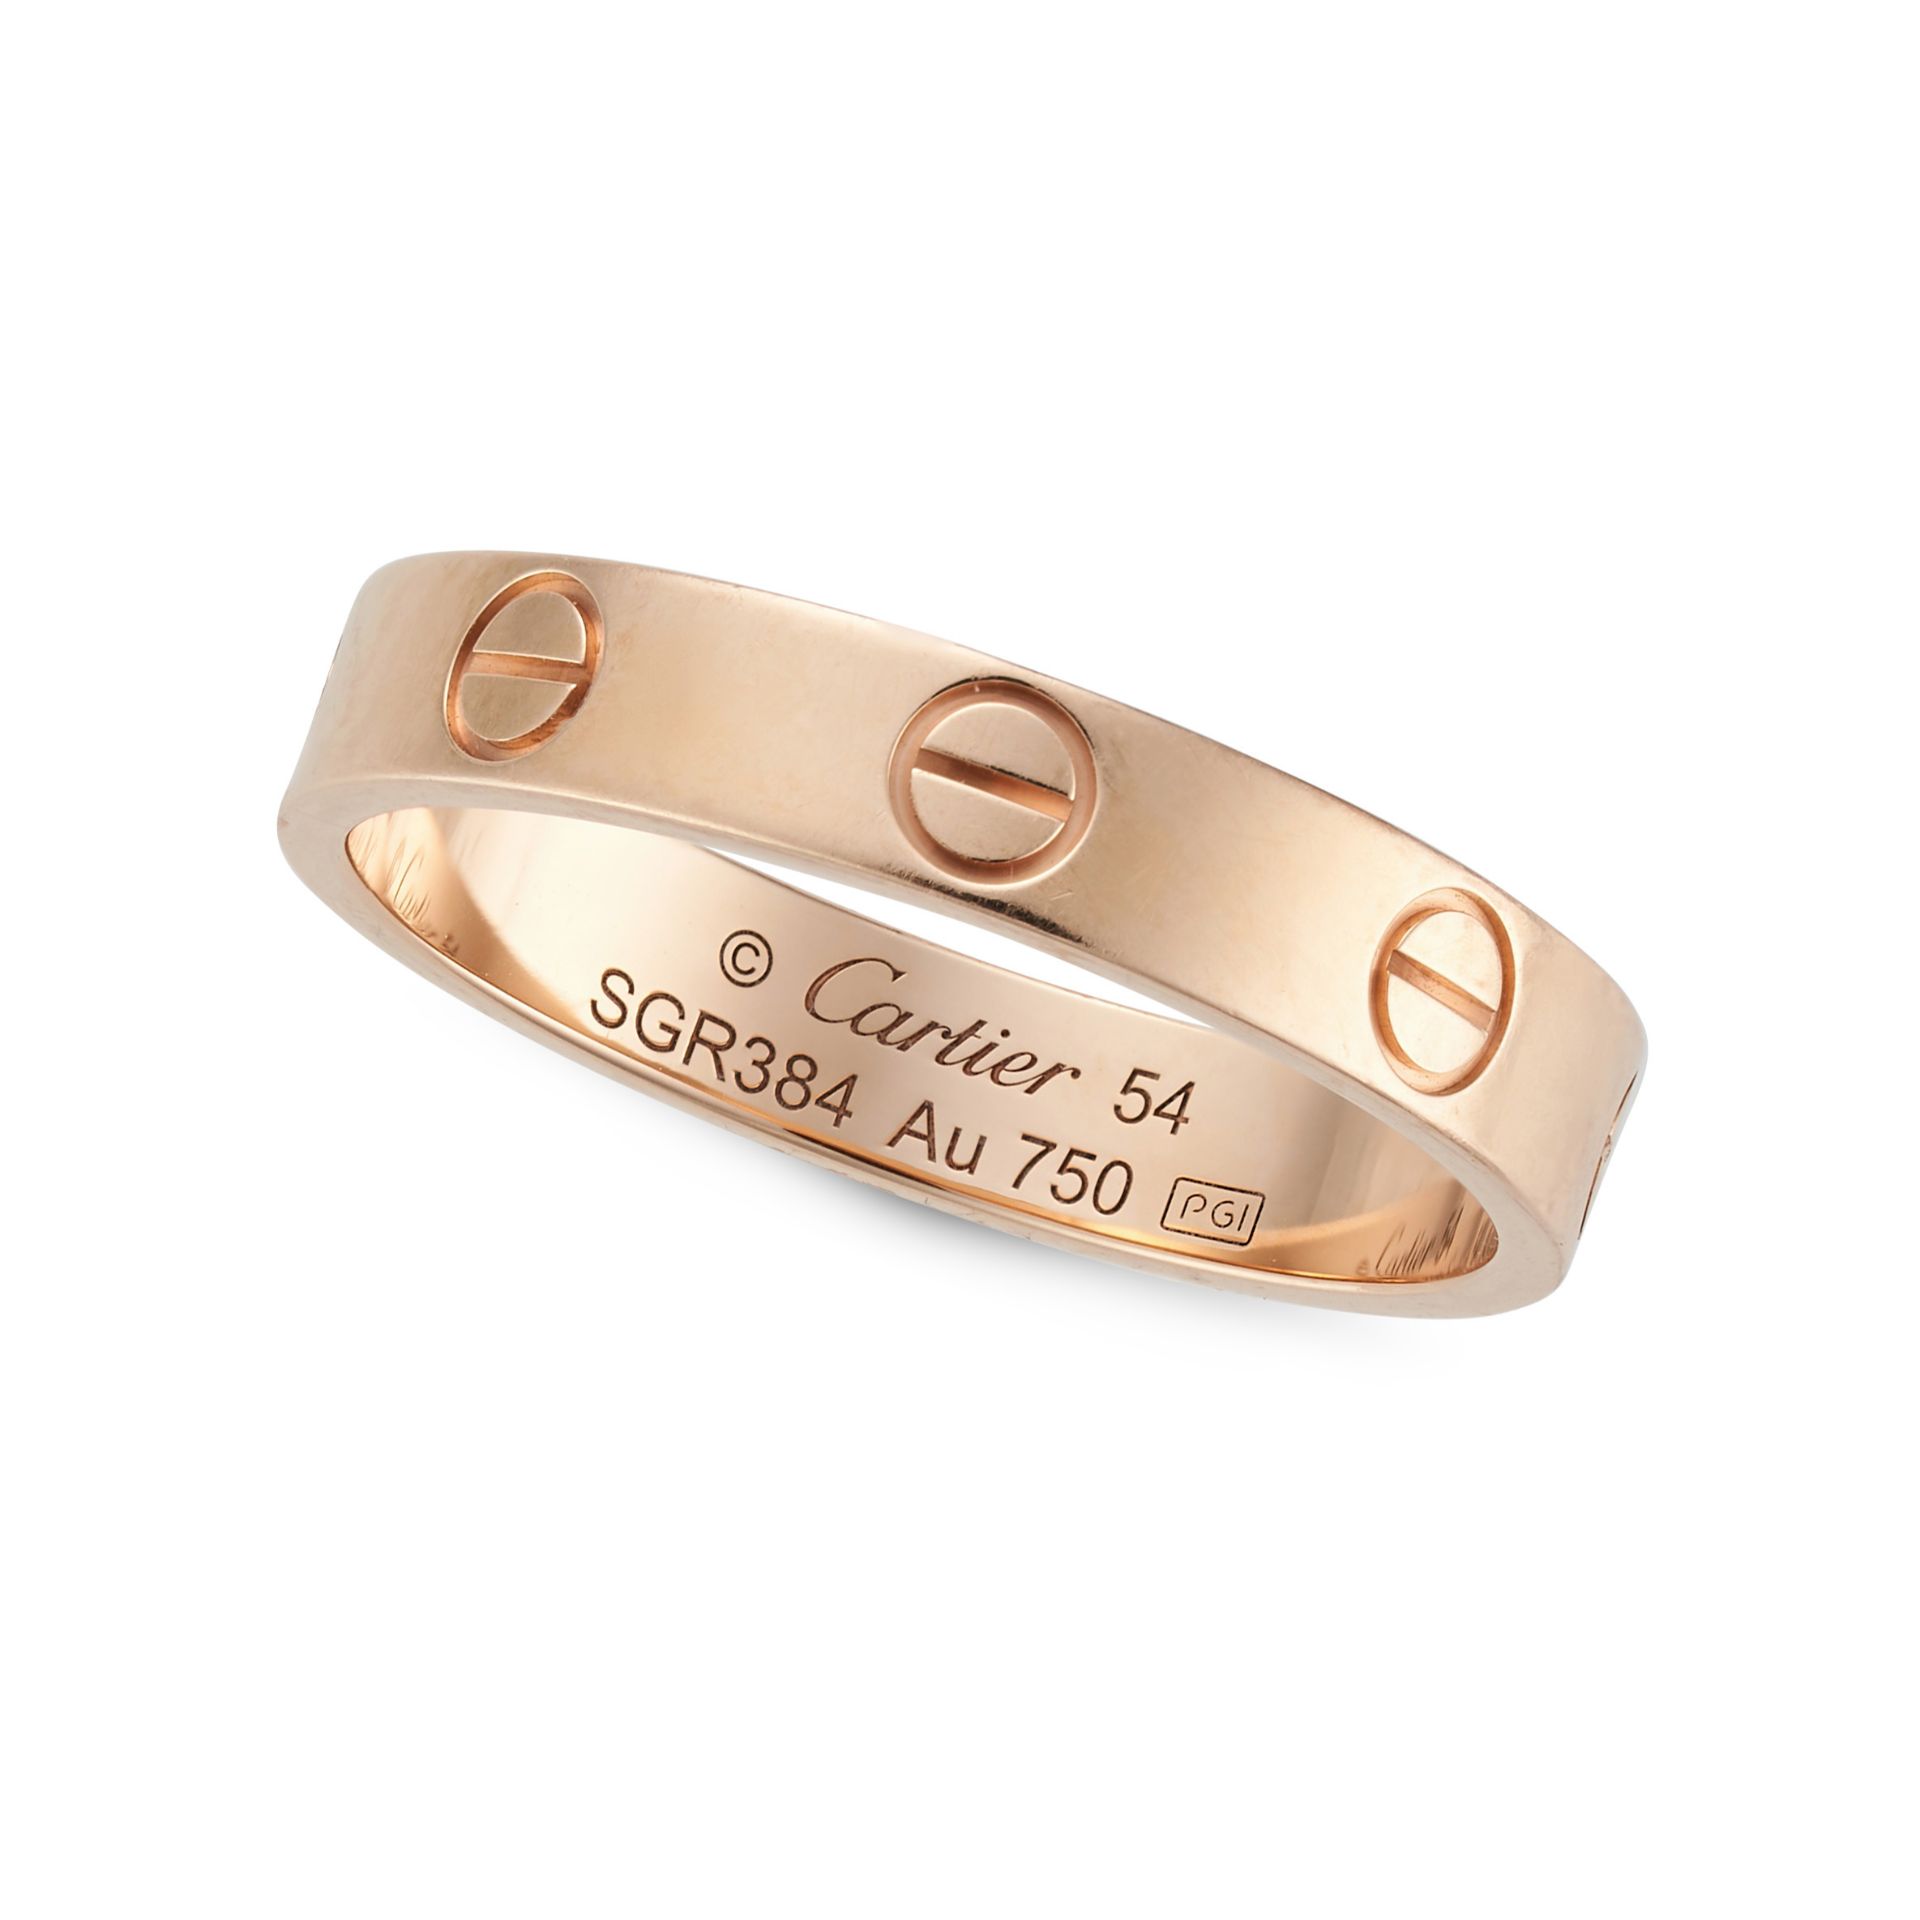 CARTIER, A LOVE RING in 18ct rose gold, the band punctuated by screw head motifs, signed Cartier ... - Image 2 of 2